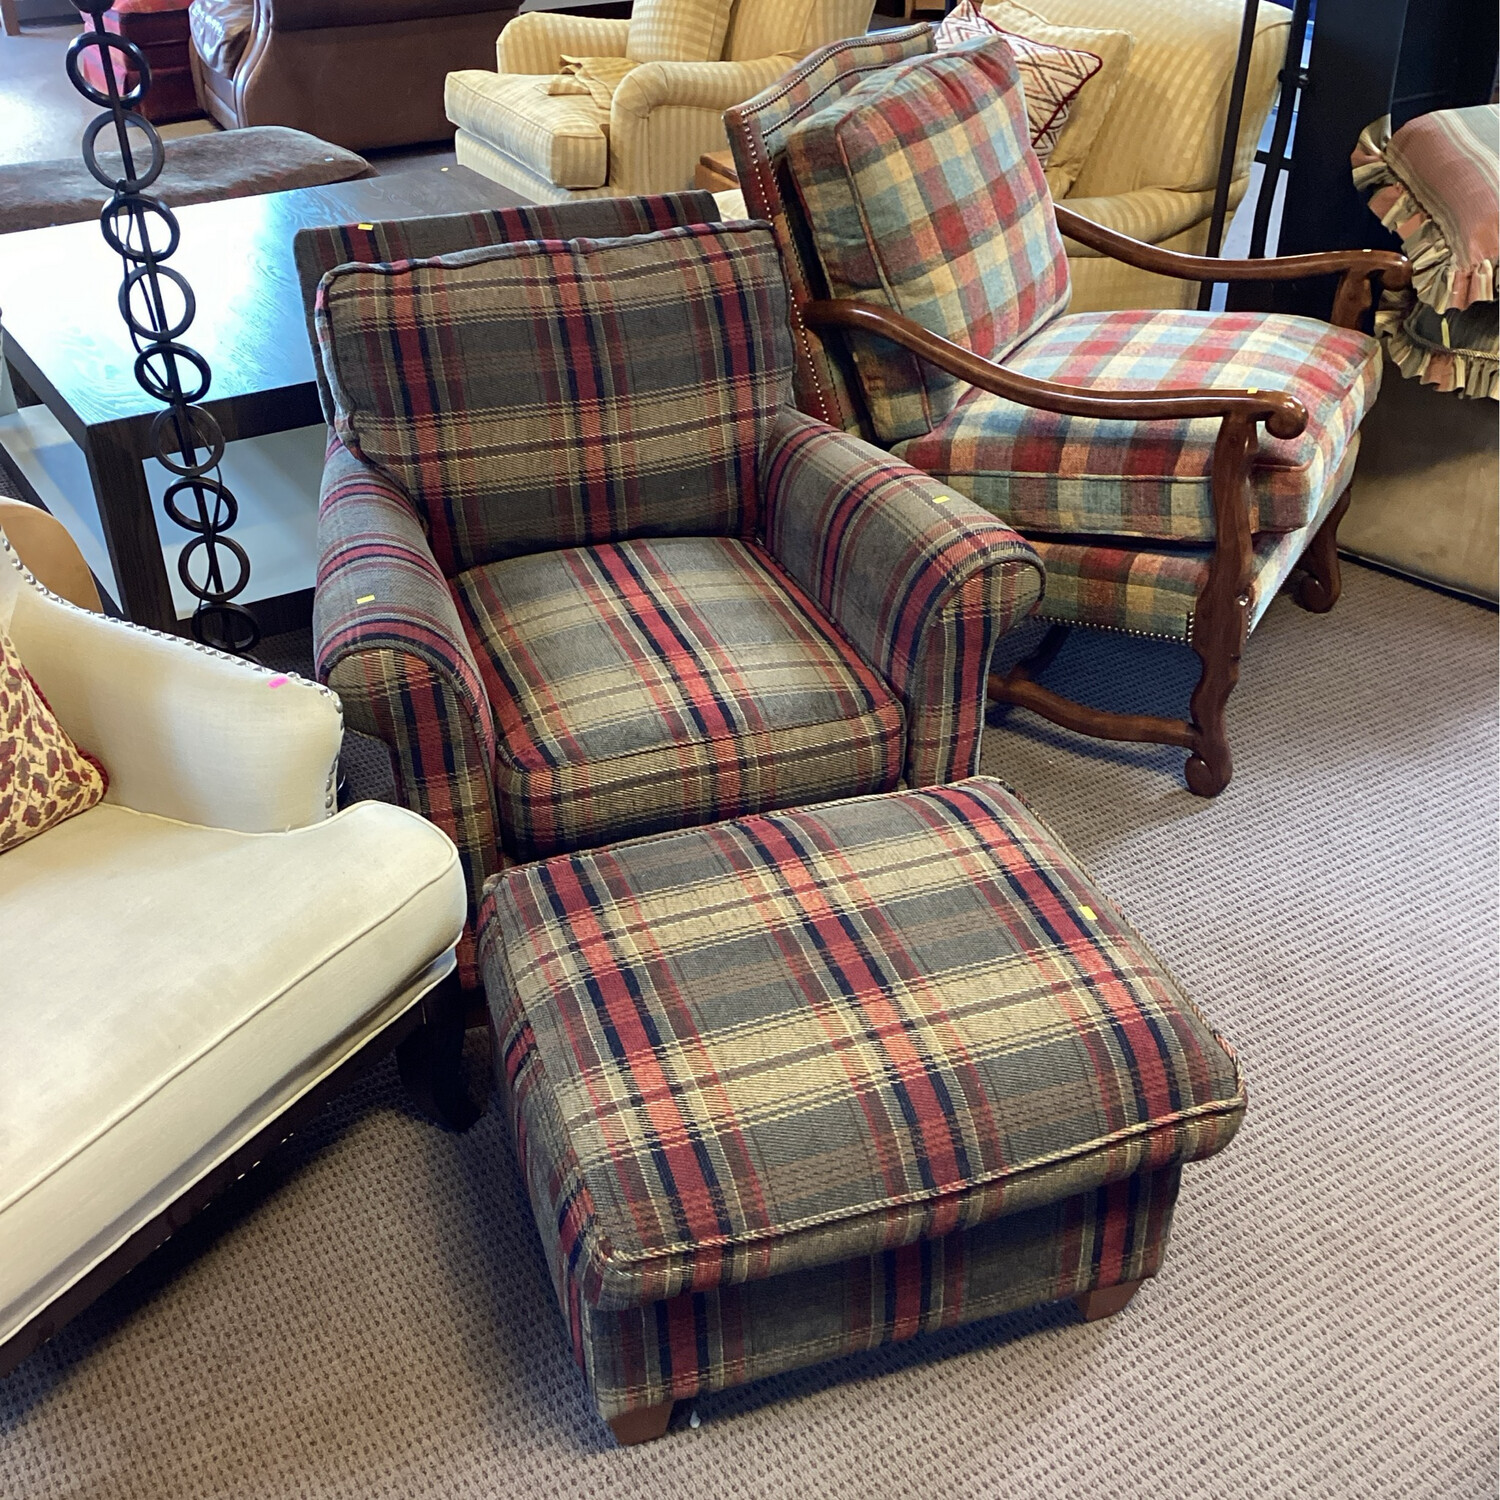 Plaid Chair and Foot Rest